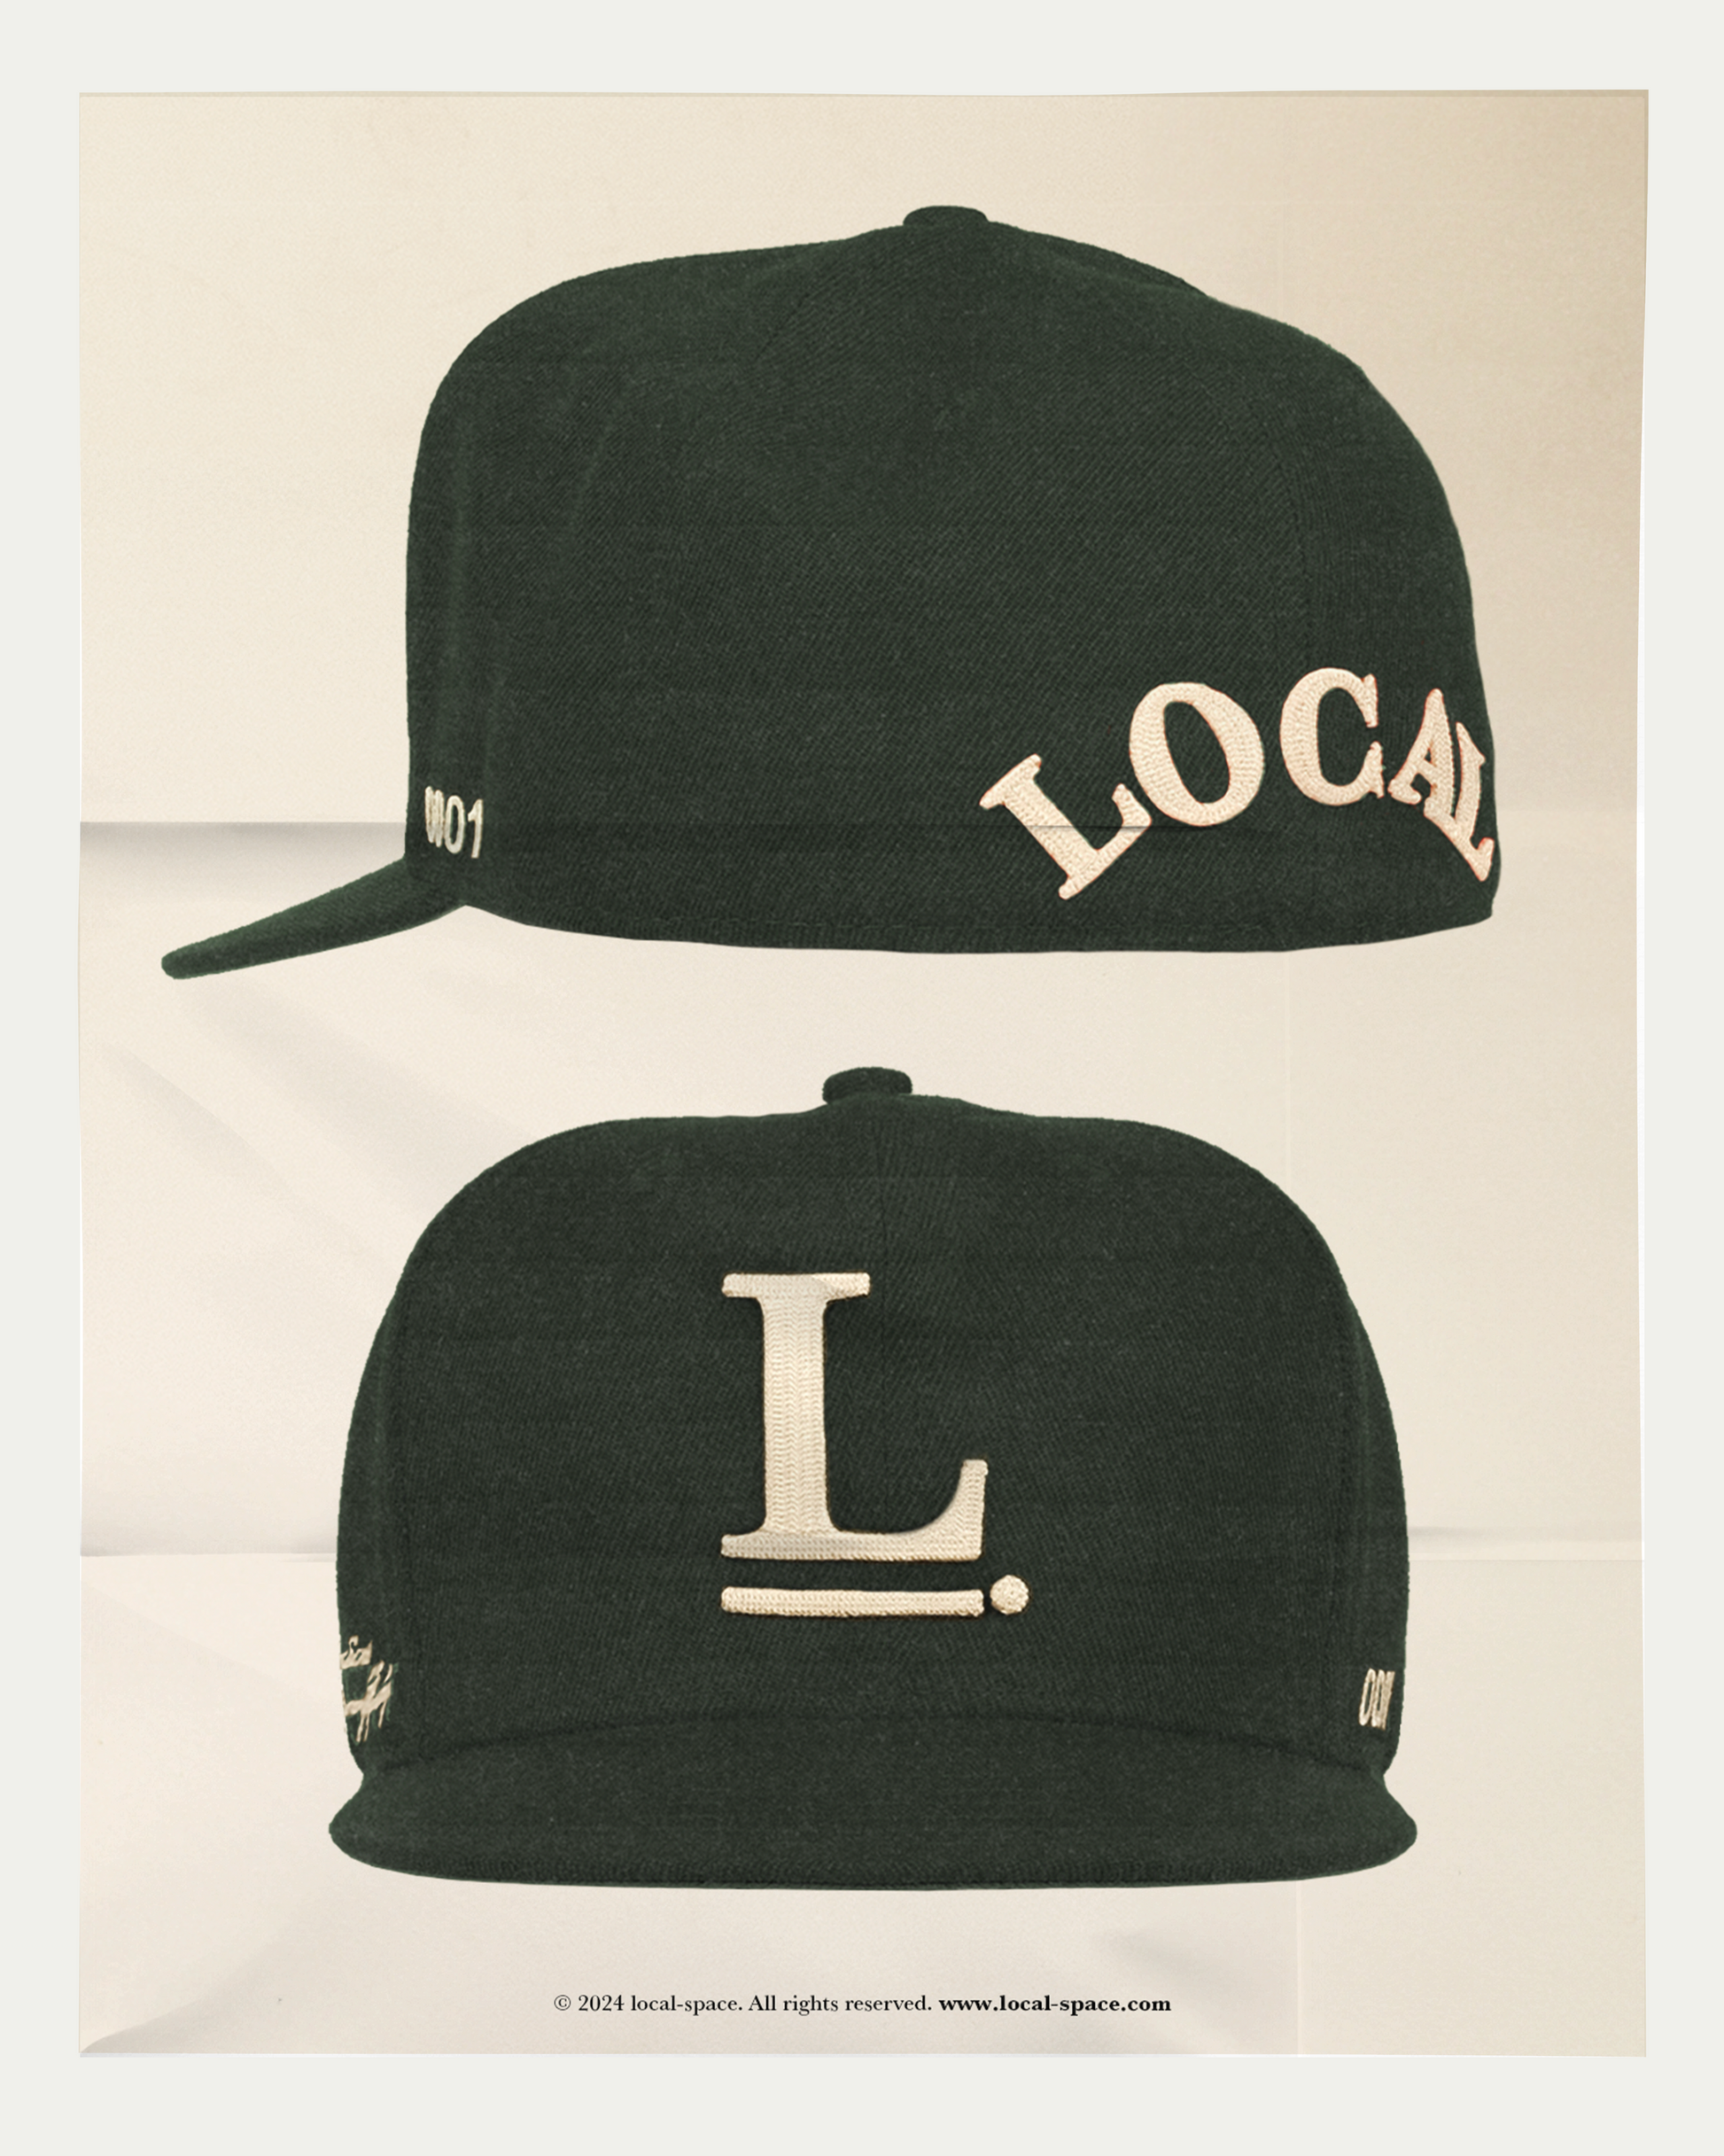 Forest Green fitted baseball cap with Local Space emblem in 3D chain embroidery on the front, 'ISSUE 0001' on the left, and LOCAL logo on the rear, structured crown and flat brim with a grey underside.